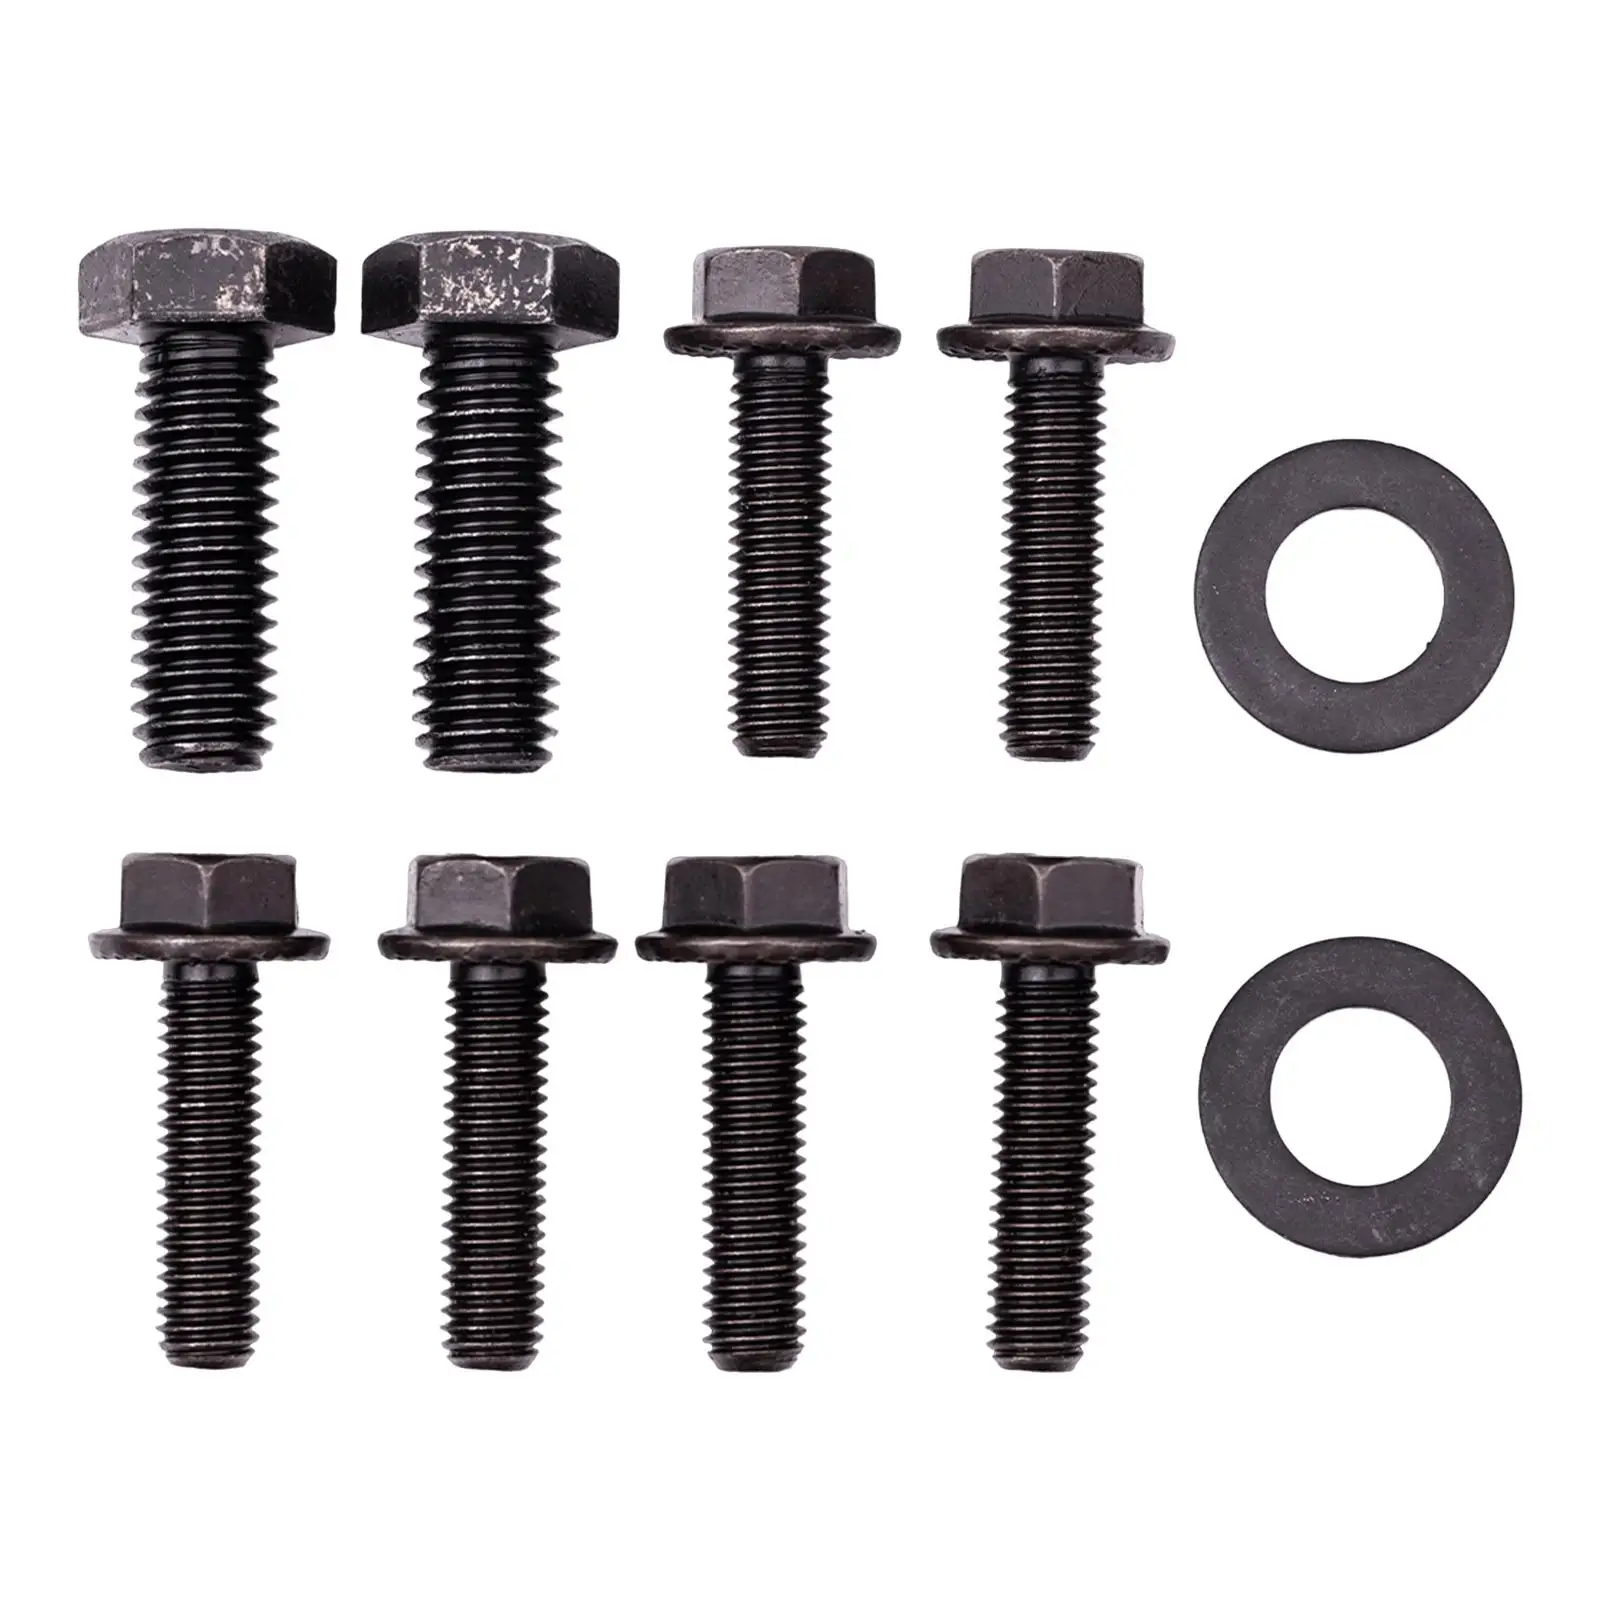 Front Seat Mounting Bolts Attachment Professional Heavy Duty Stable Performance Automotive for Jeep Wrangler TJ 1997-2006